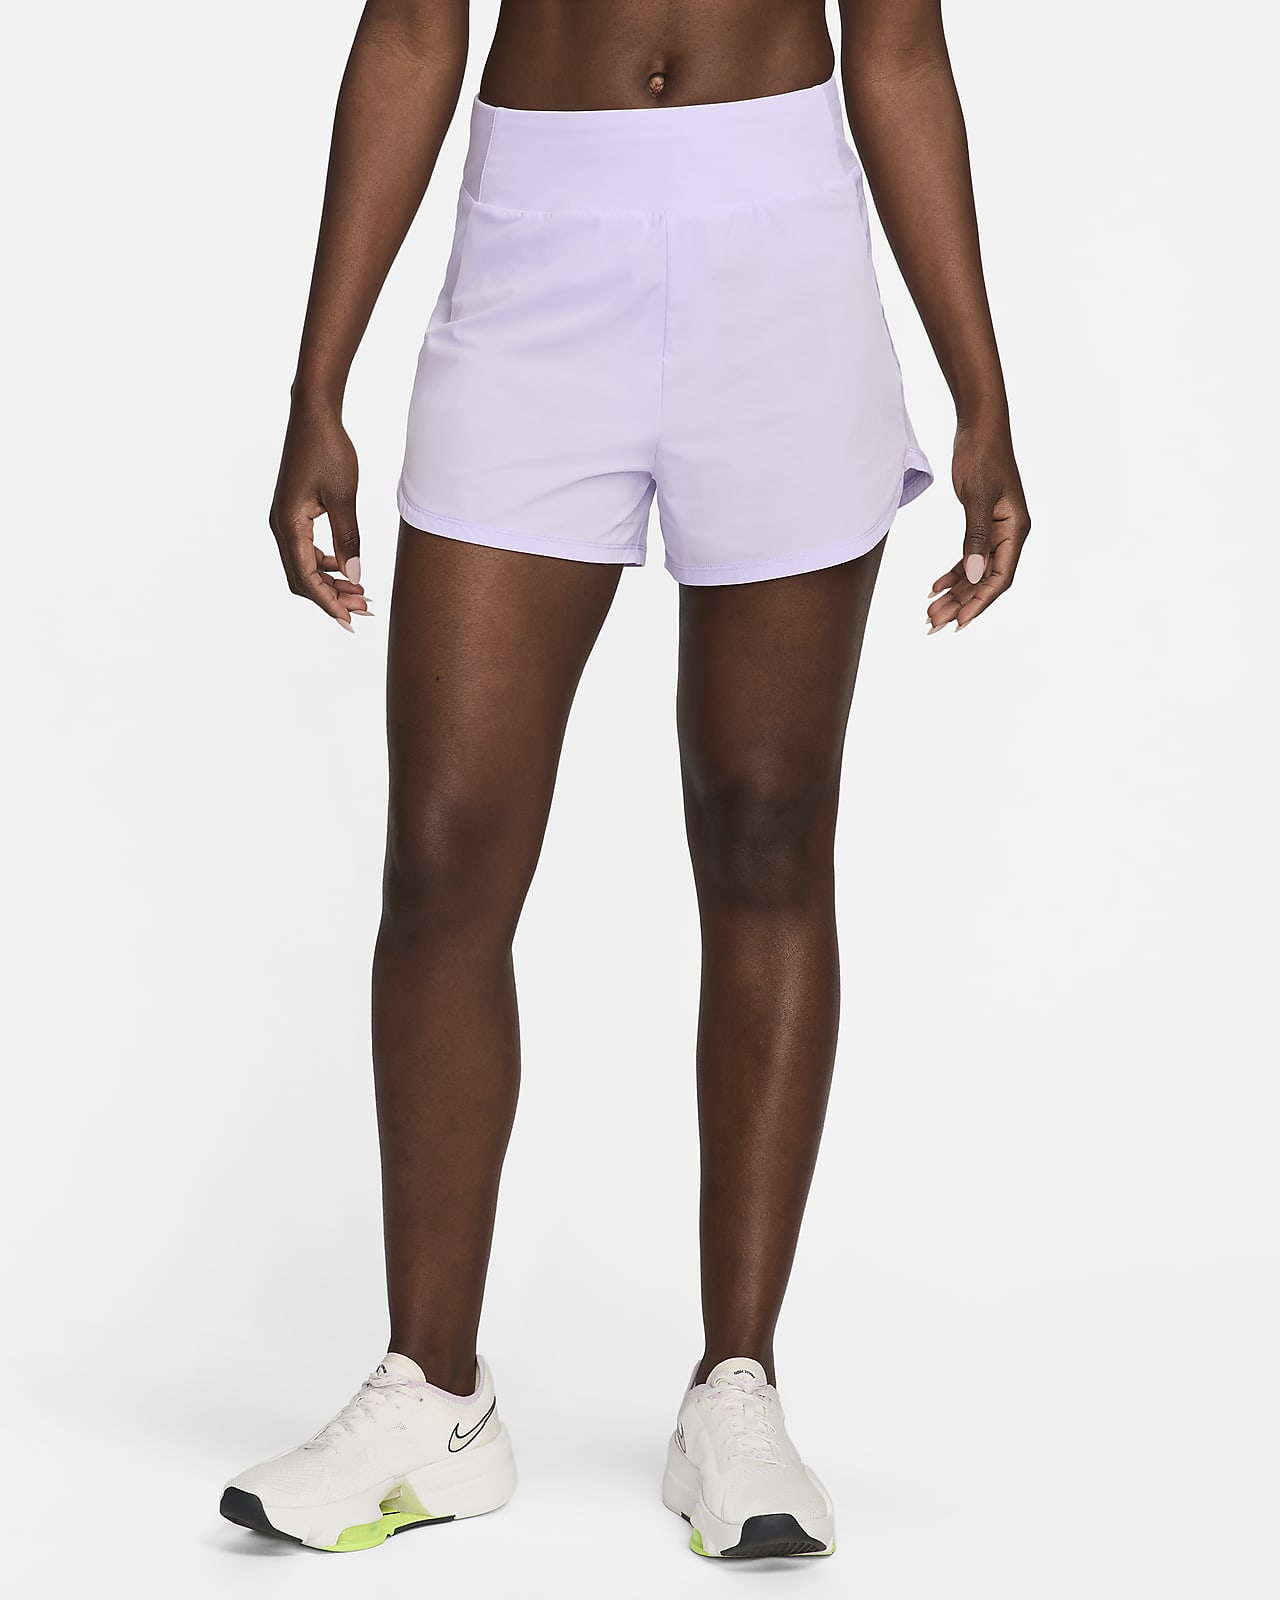 Nike Bliss Women's Dri-FIT Fitness High-Waisted 8cm (approx.) Brief-Lined  Shorts. Nike CA